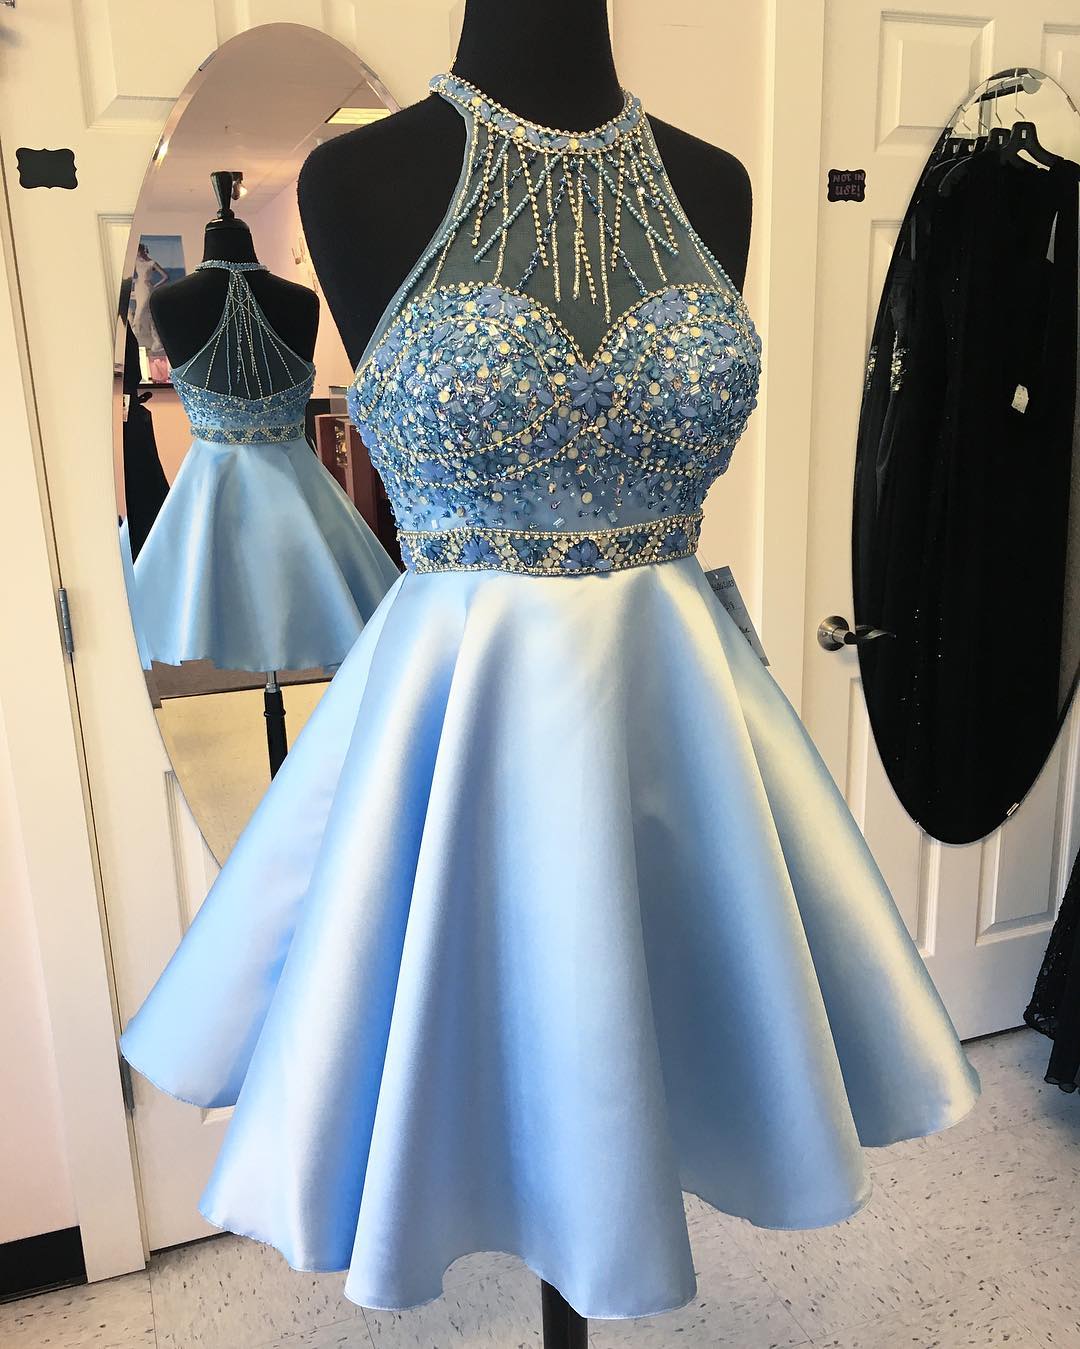 Short Light Blue Prom Dresses Sexy Rhinestone Beaded Halter Evening Dresses 2016 Real Photo Women Party Dresses Formal Gowns